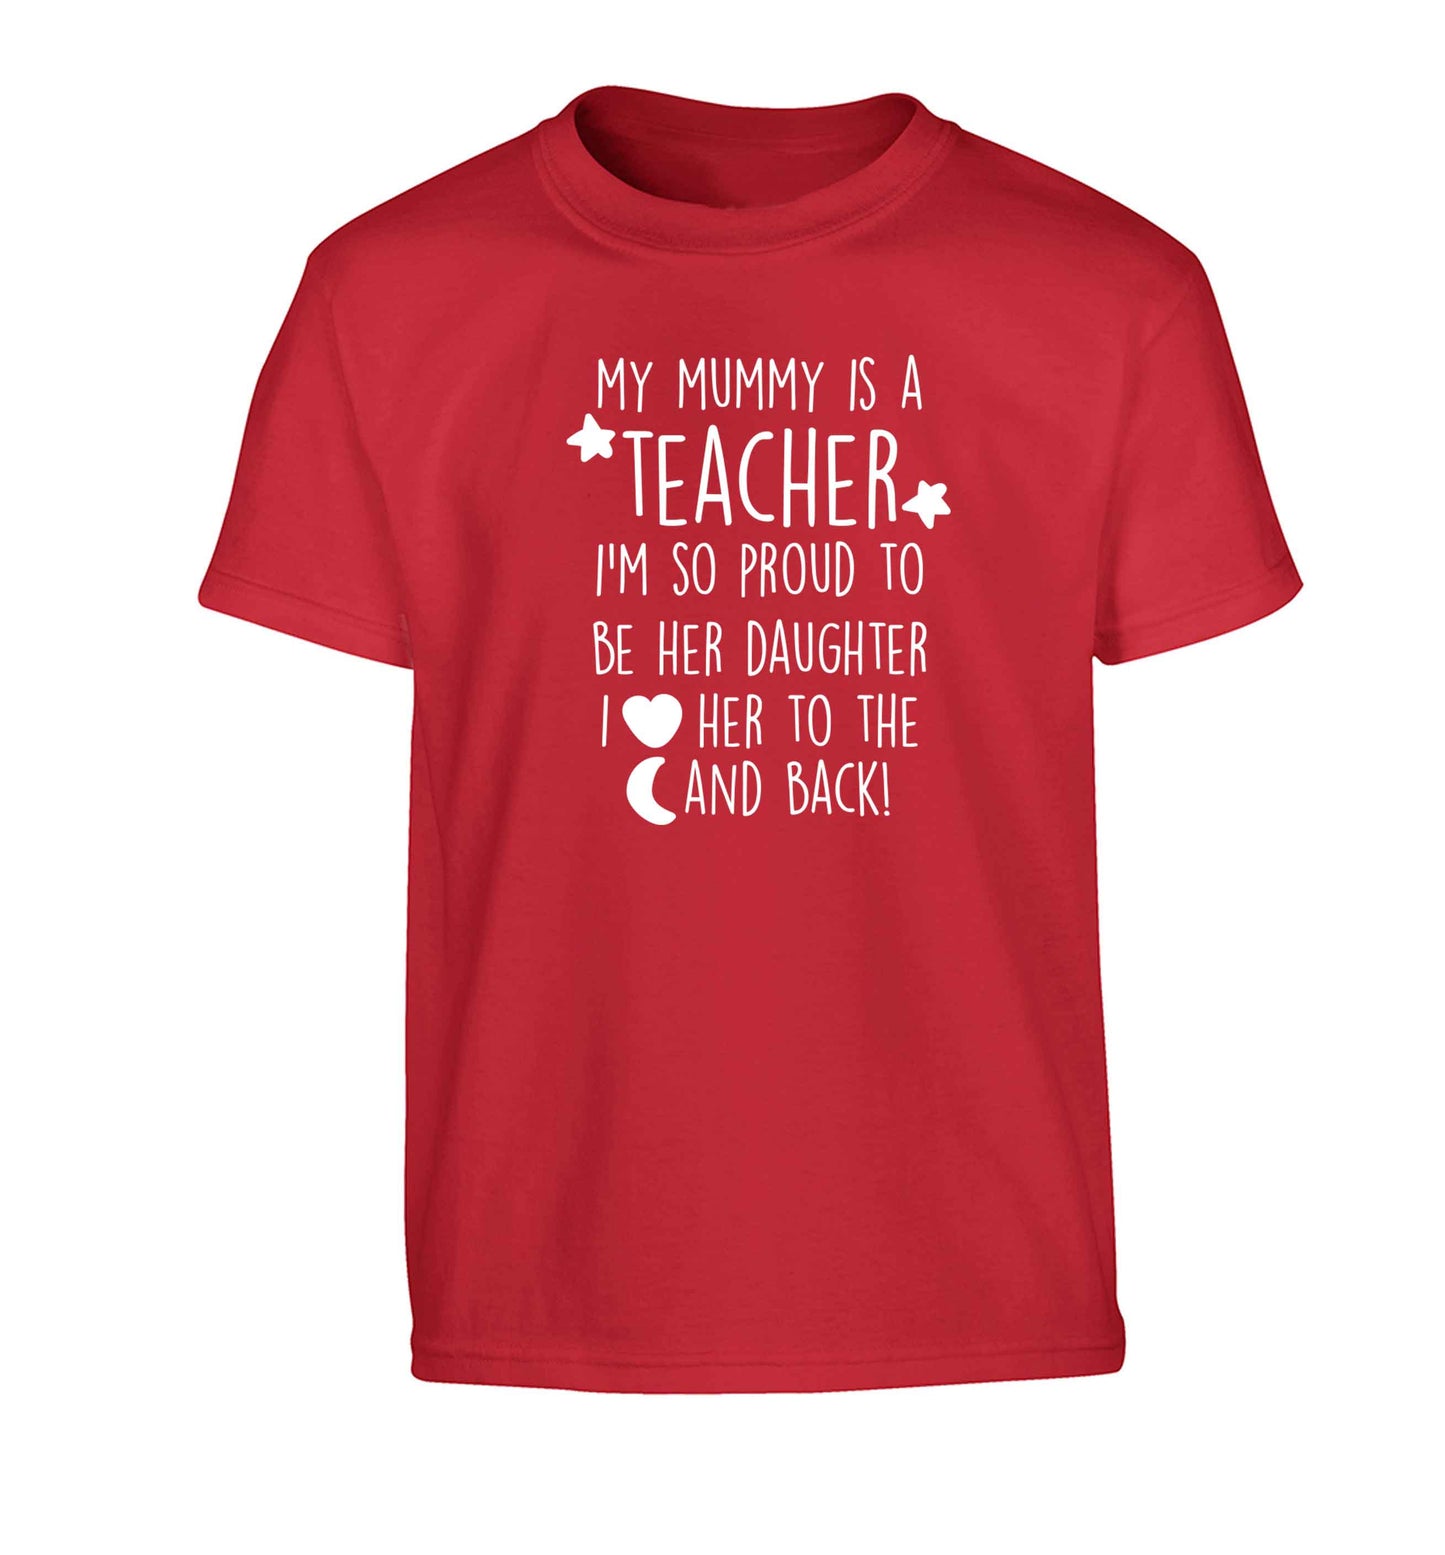 My mummy is a teacher I'm so proud to be her daughter I love her to the moon and back Children's red Tshirt 12-13 Years